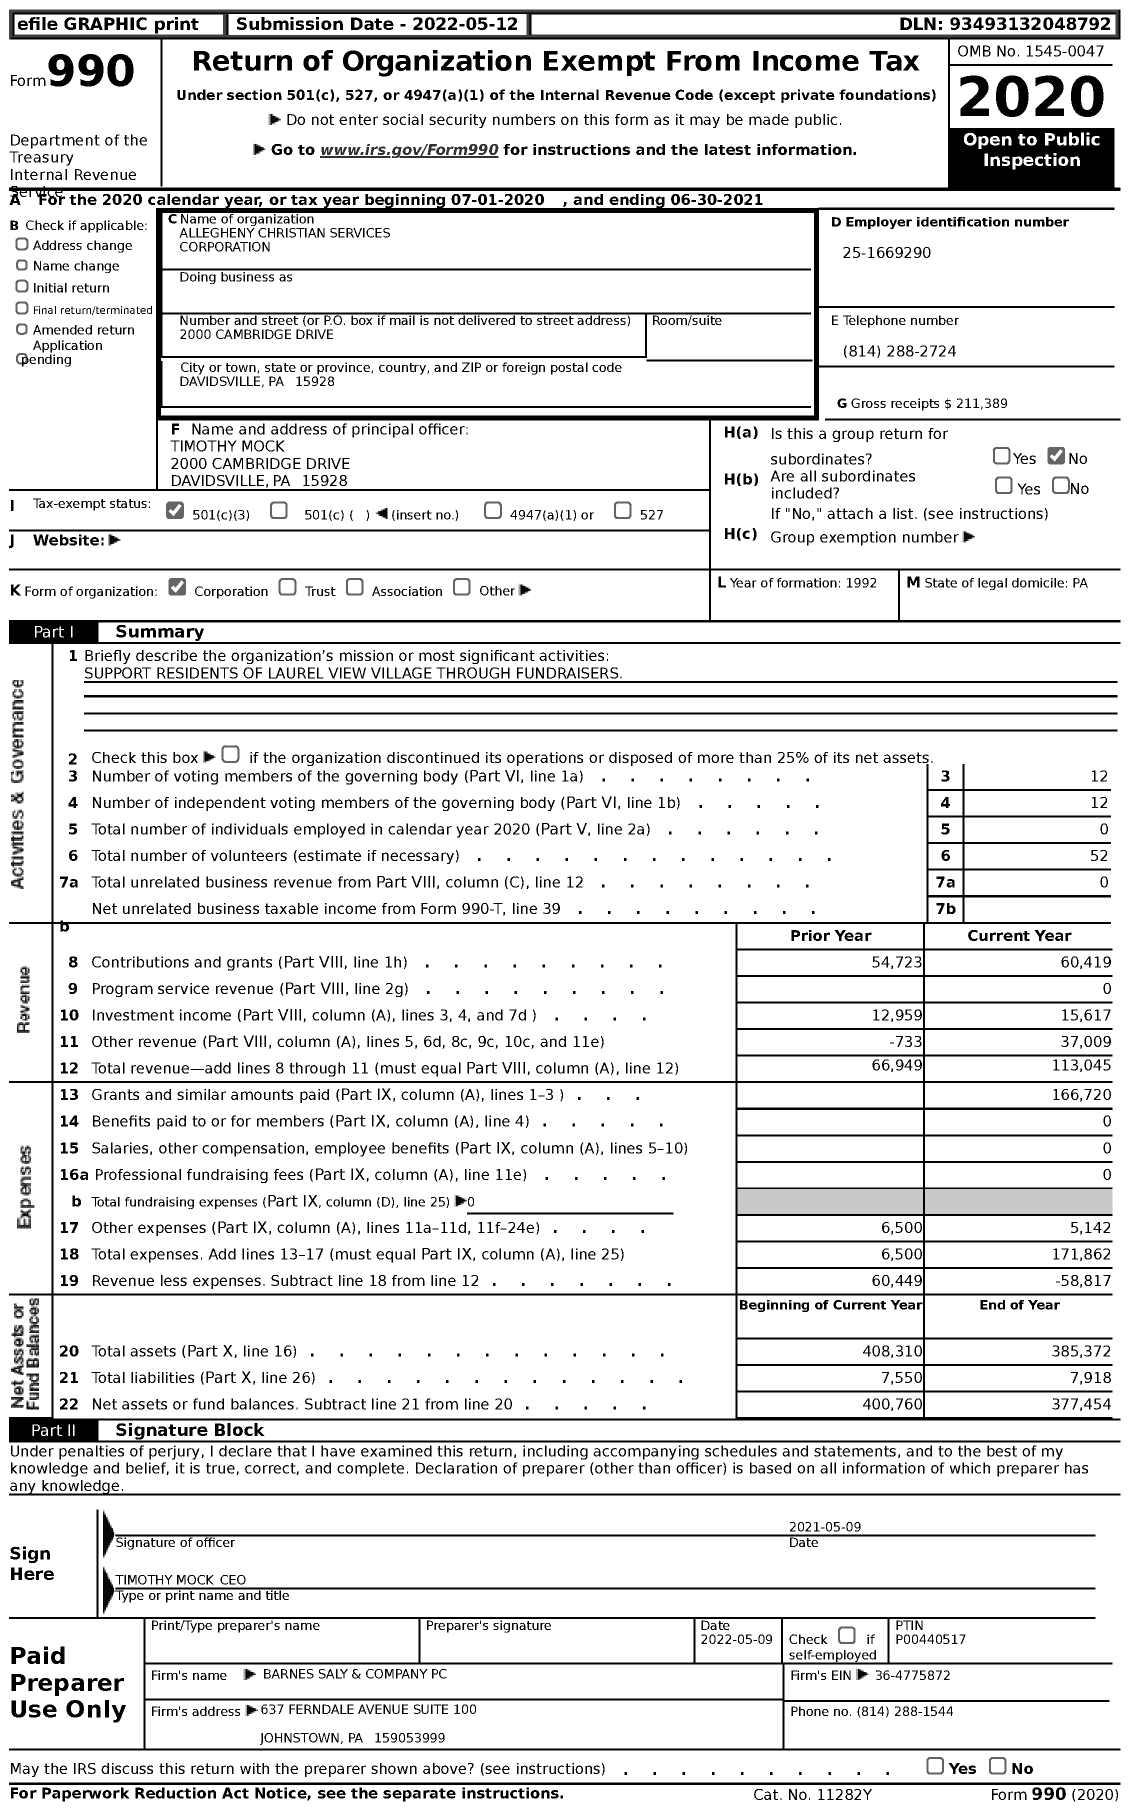 Image of first page of 2020 Form 990 for Allegheny Christian Services Corporation